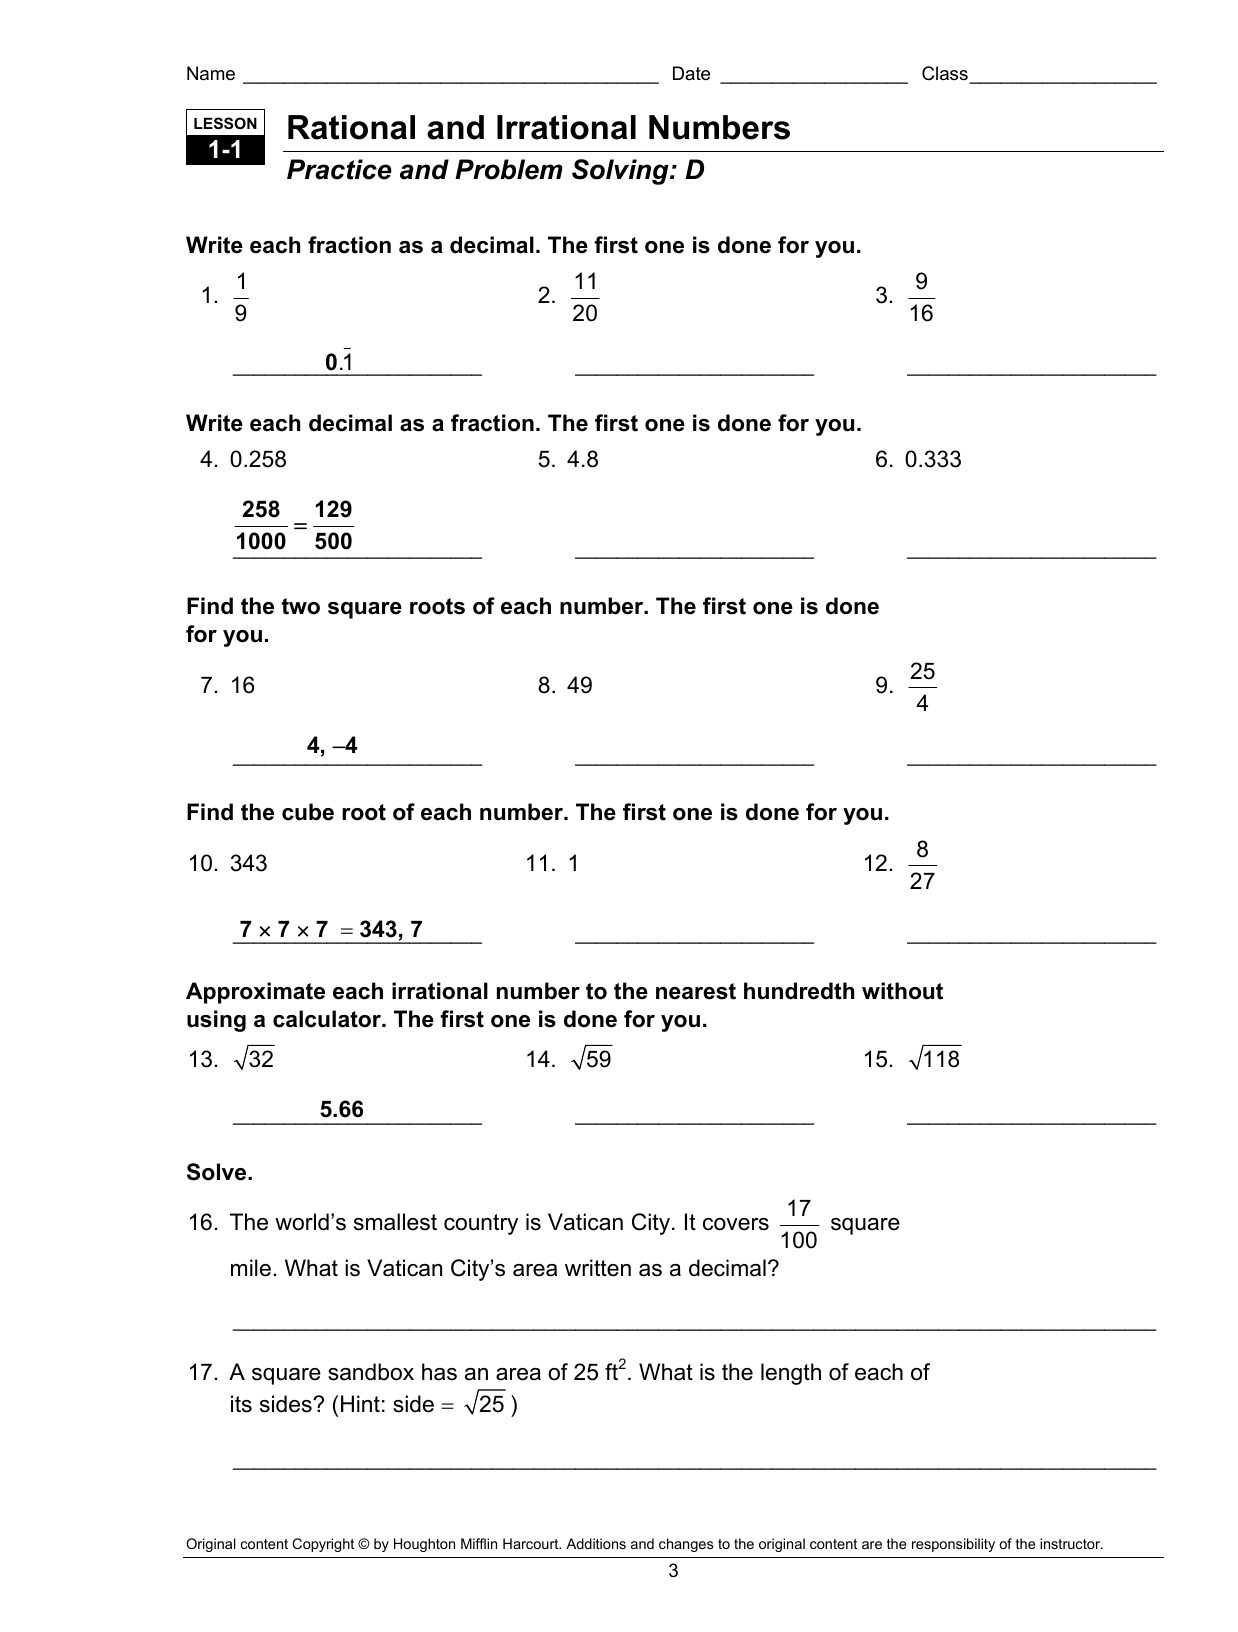 Rational and Irrational Numbers Regarding Rational And Irrational Numbers Worksheet